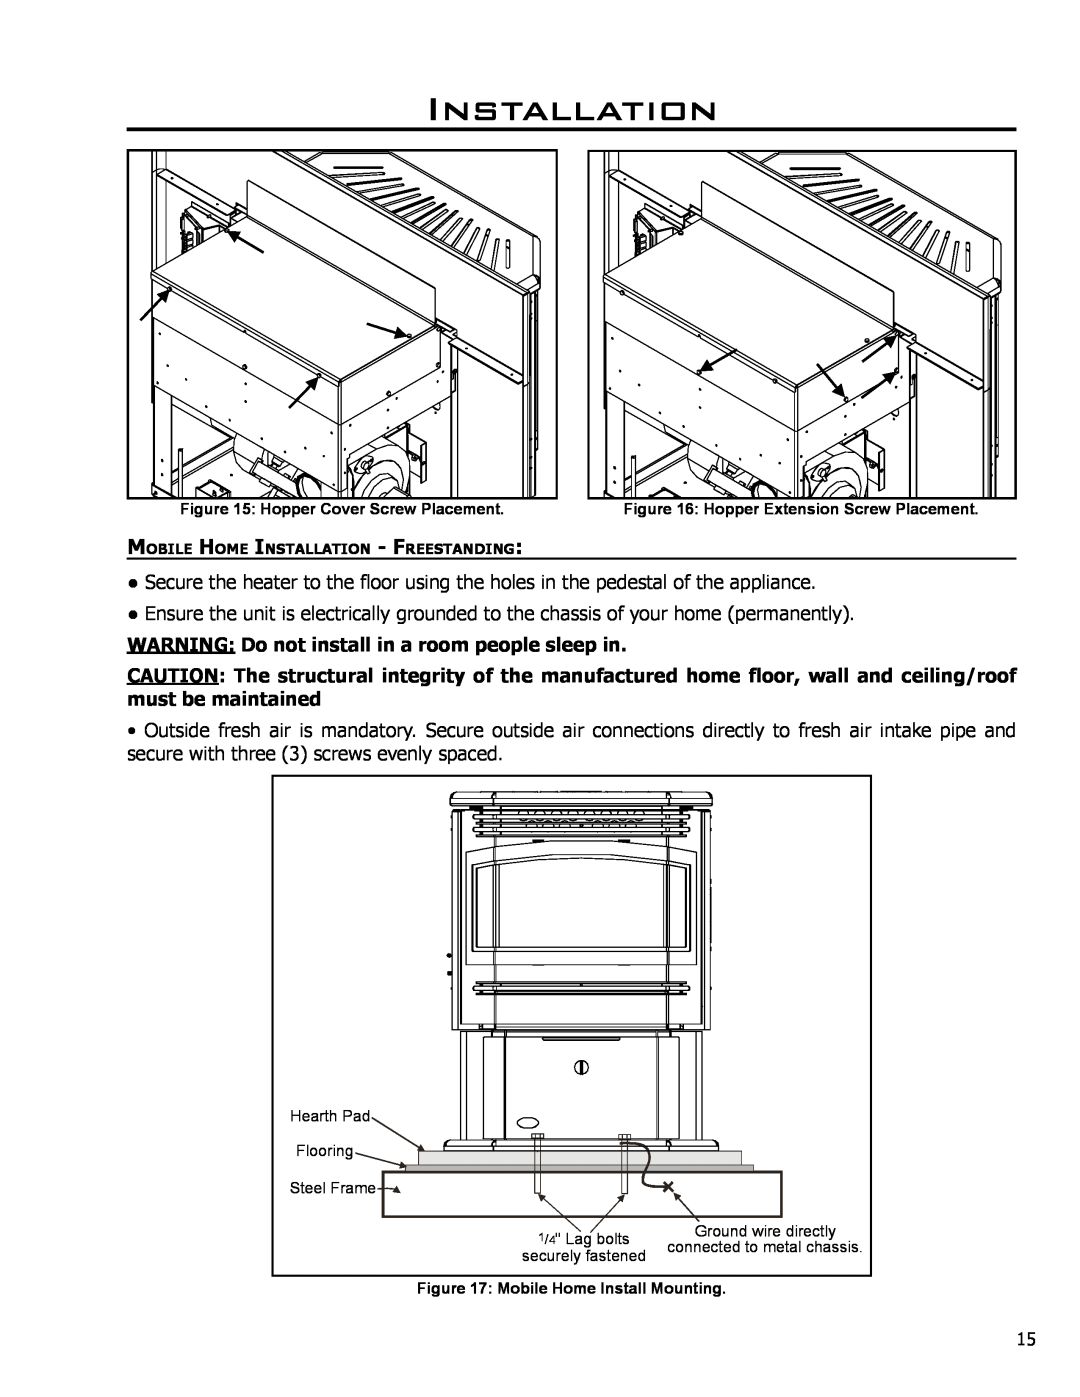 Enviro Meridian owner manual WARNING Do not install in a room people sleep in, Installation, Hopper Cover Screw Placement 